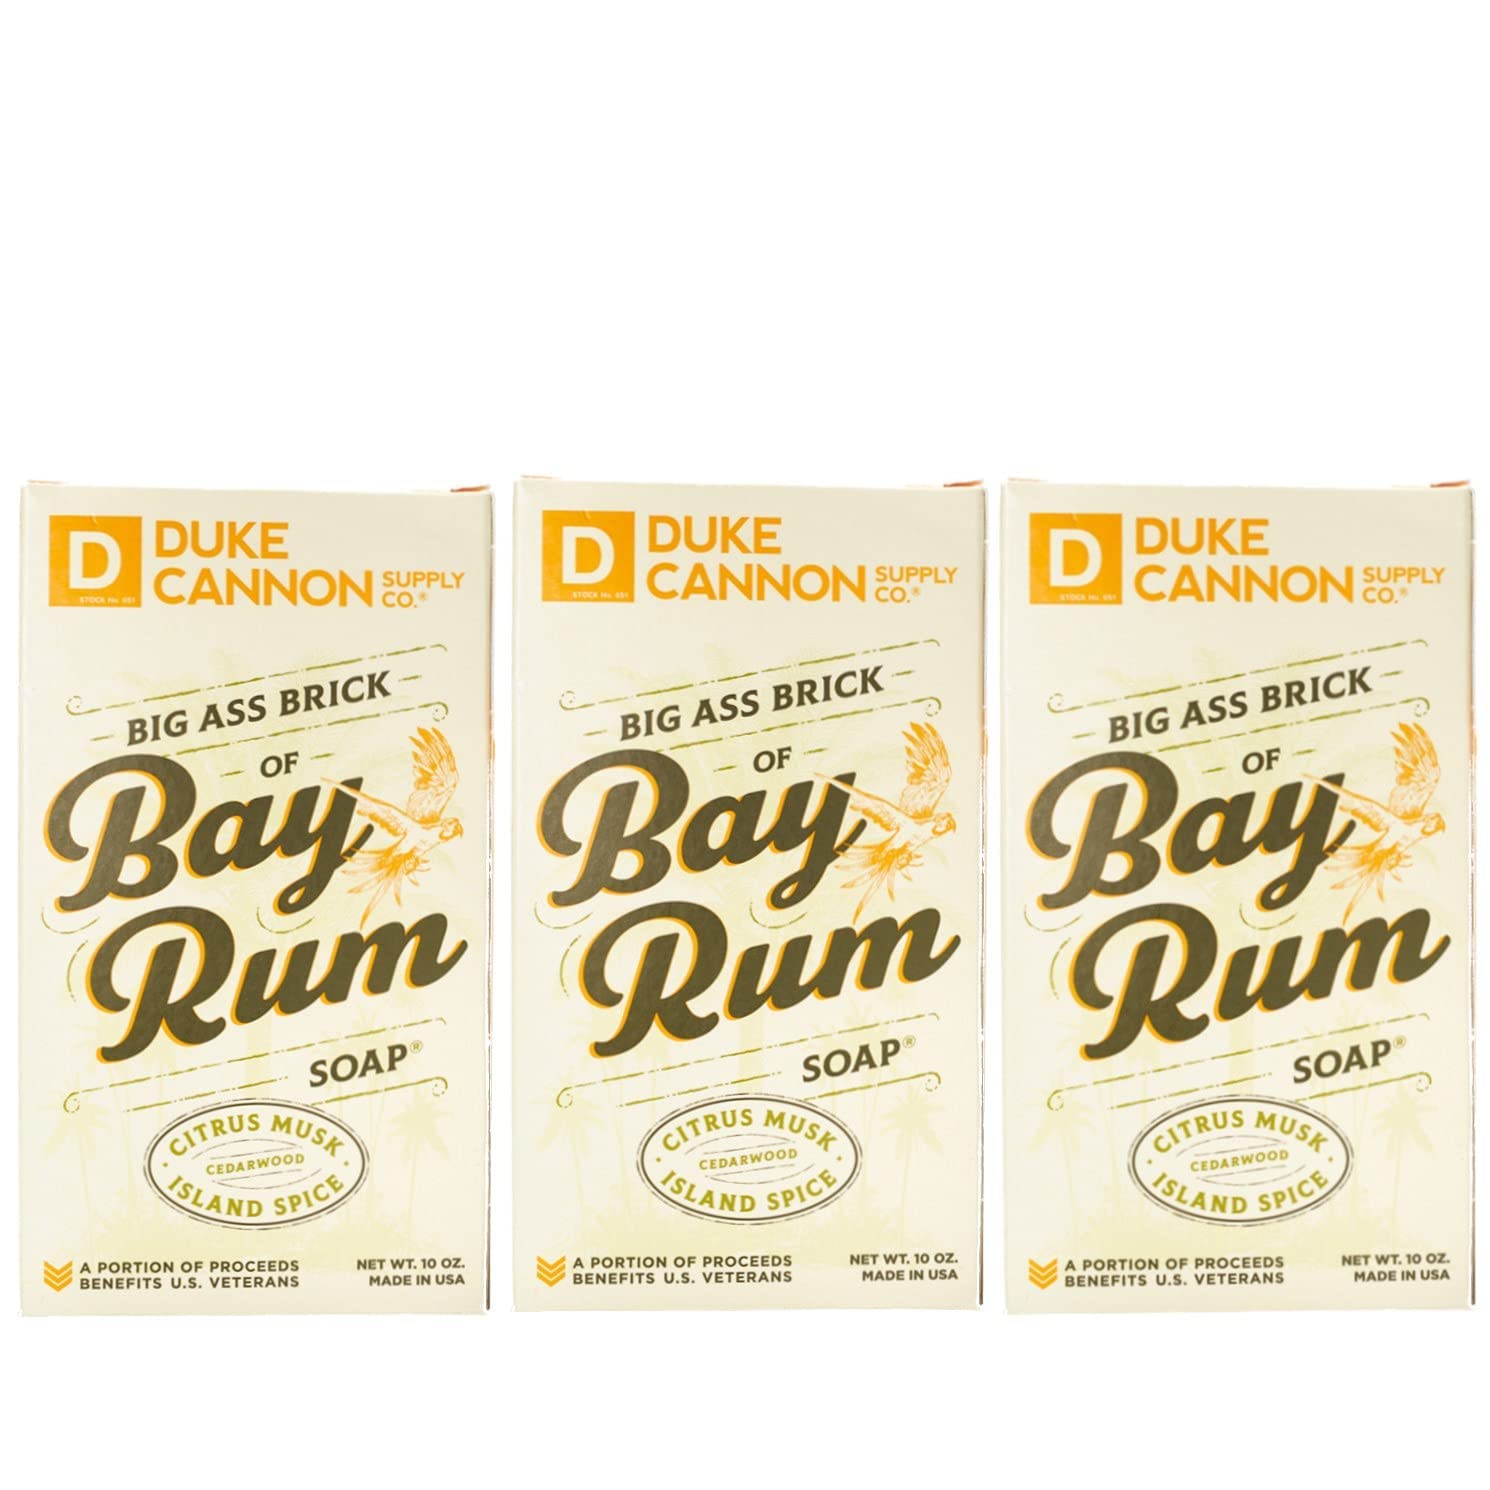 Duke Cannon Supply Co. Big Ass Brick of Soap Bar for Men Bay Rum (Citrus Musk, Cedarwood, Island Spice Scent) Multi-Pack - Superior Grade, Extra Large, All Skin Types, Paraben-free, 10  (3 Pack)